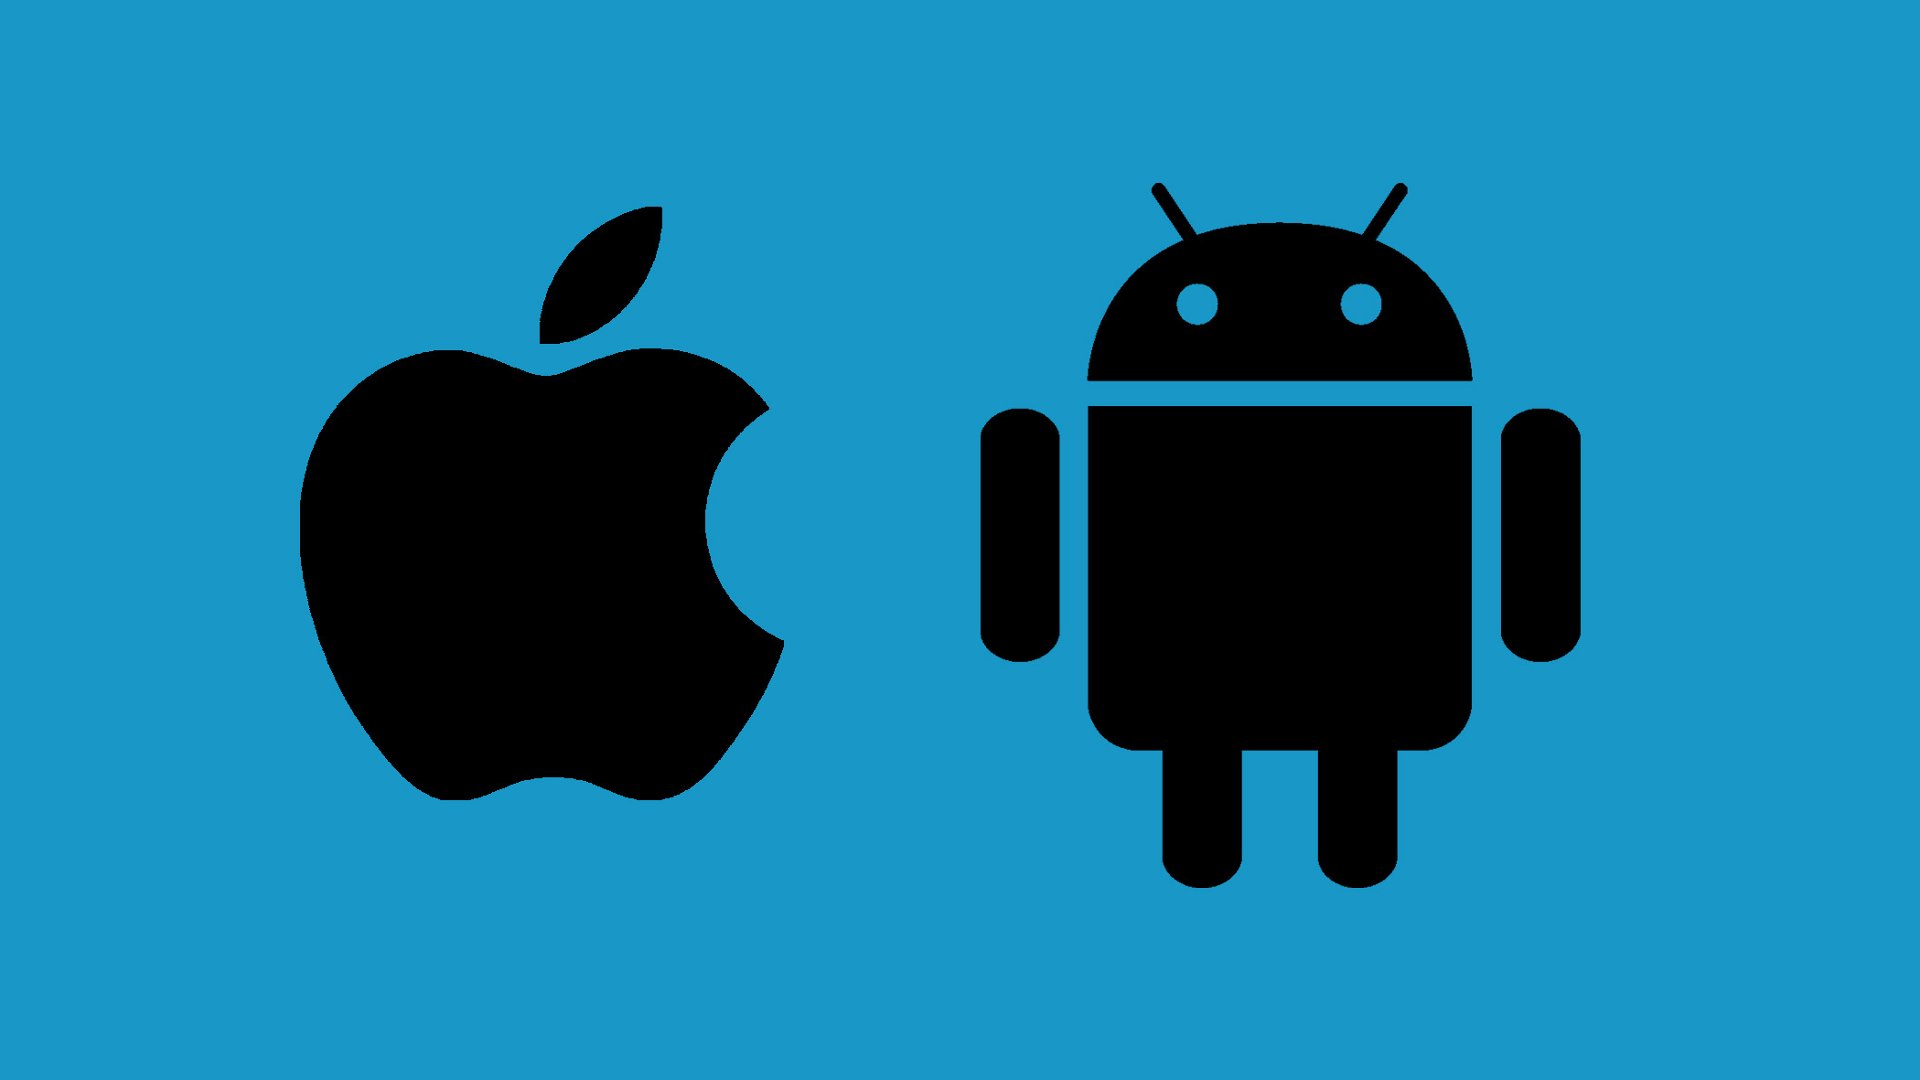 Apple iOS - Android